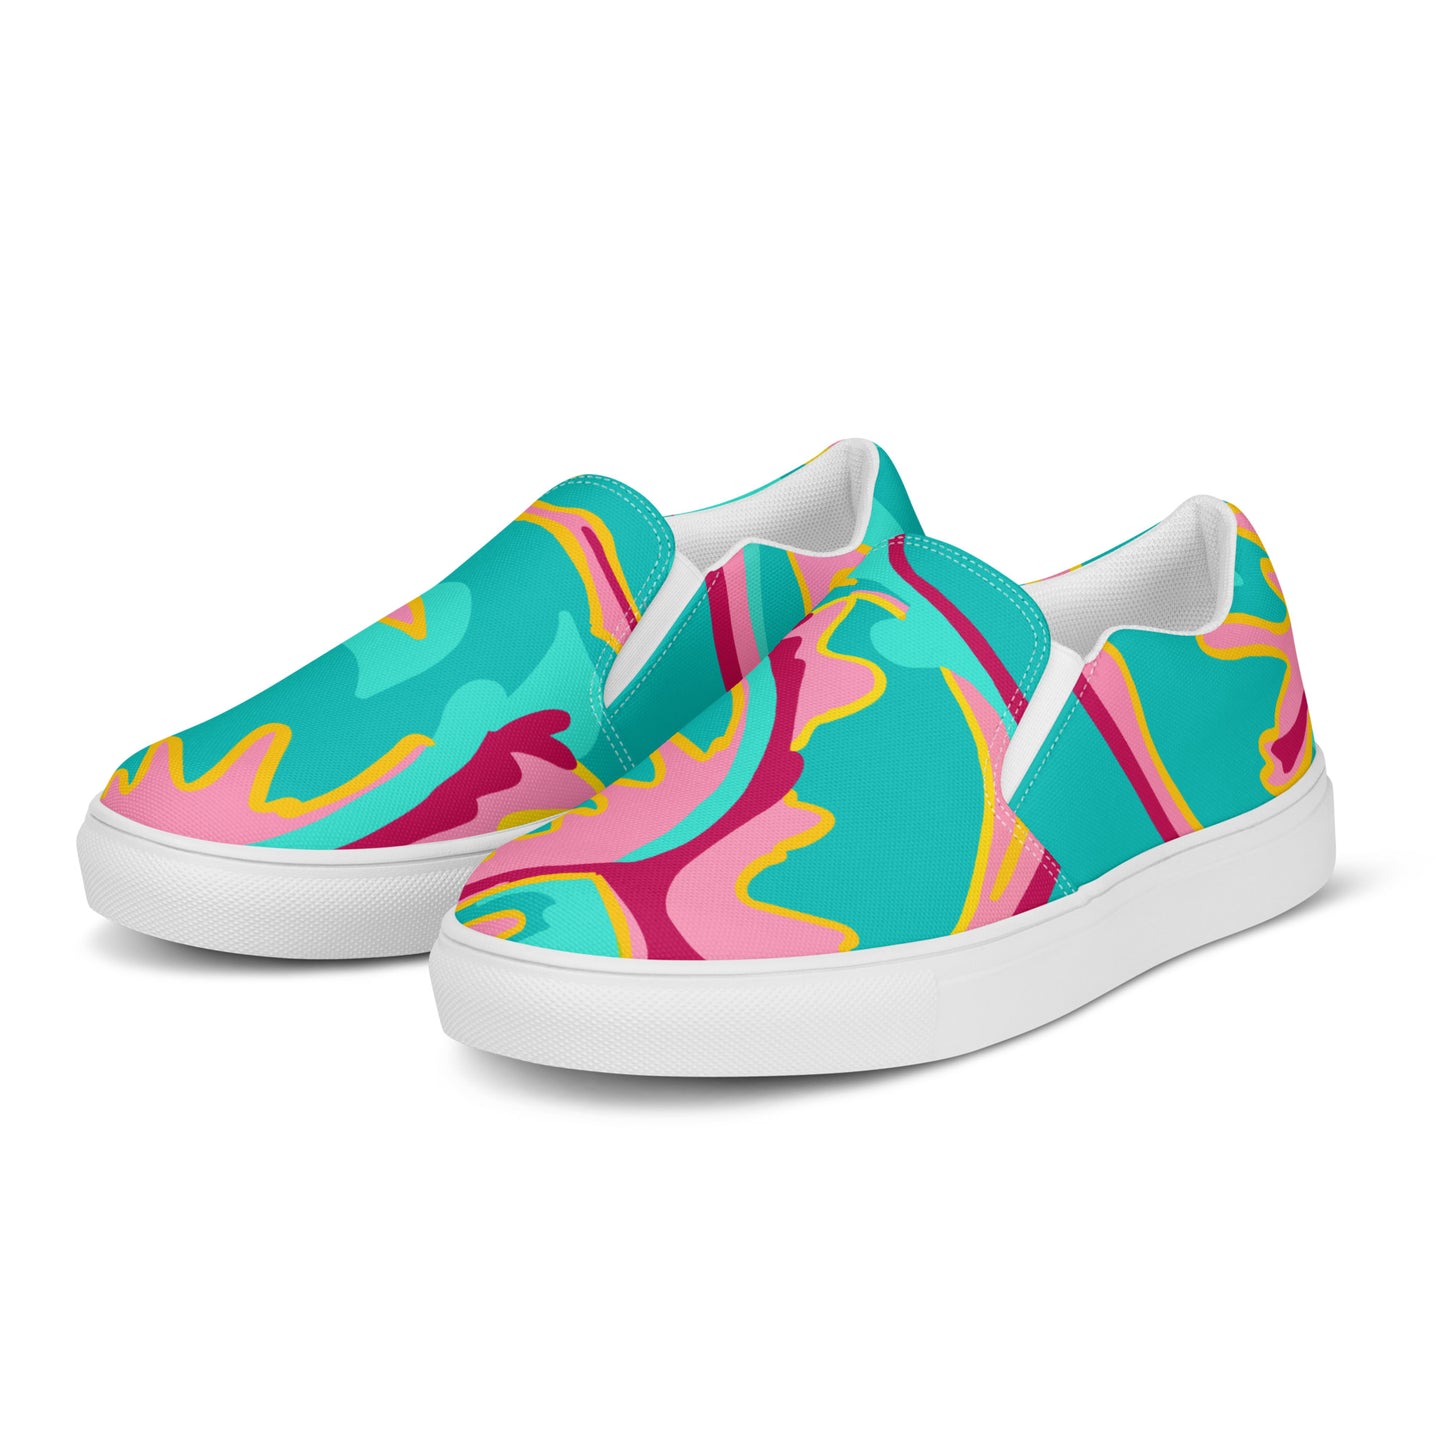 Embrace Body Love Slip-on Canvas Shoes- Teal (Women's Sizing)